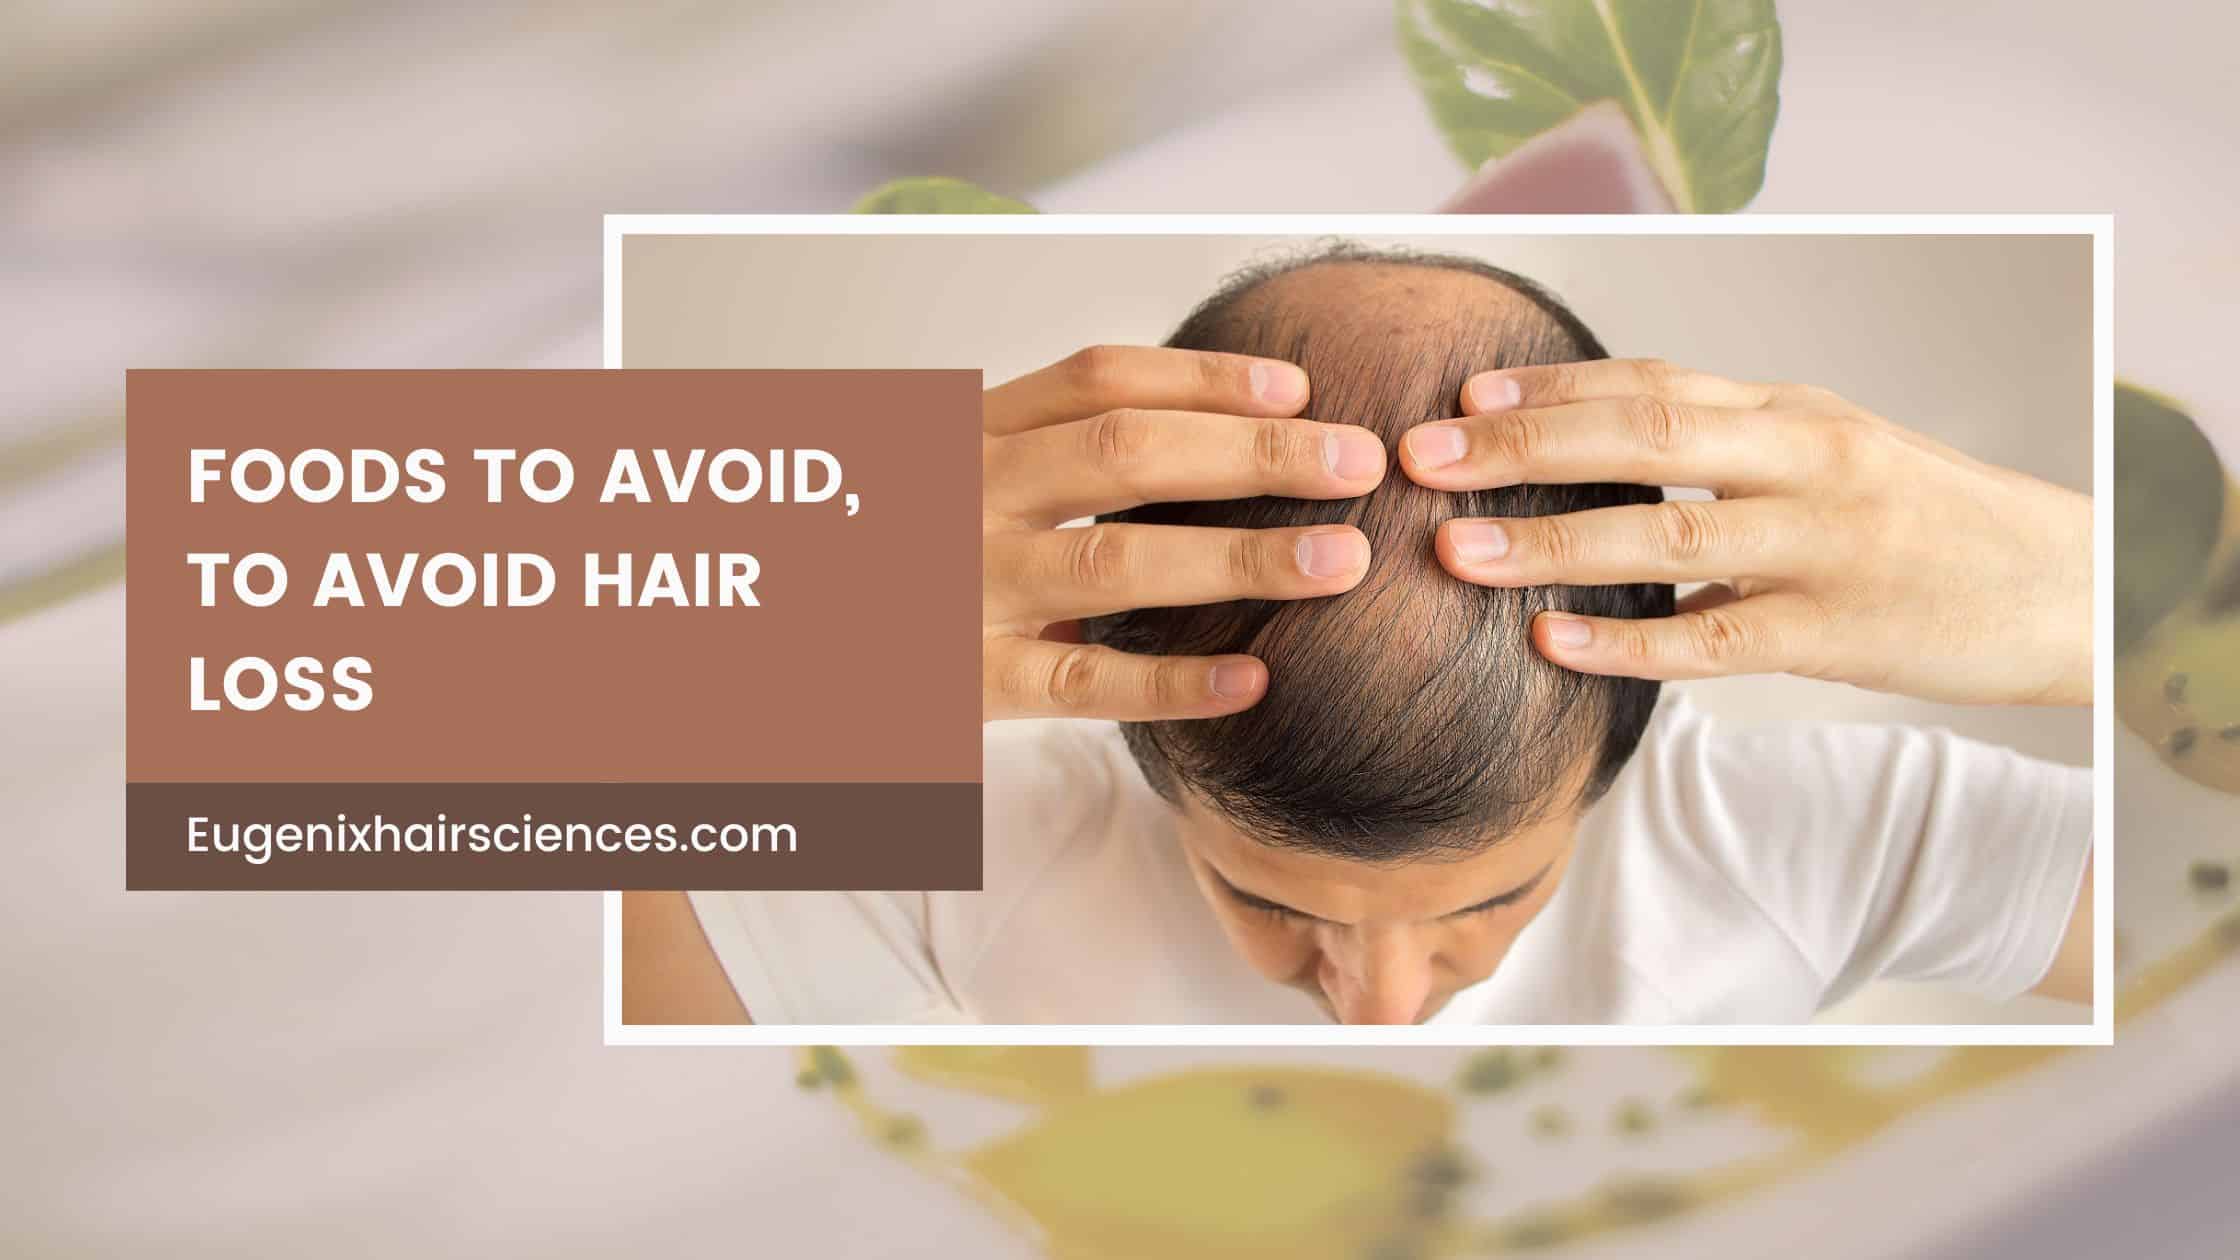 Foods To Avoid, To Avoid Hair Loss